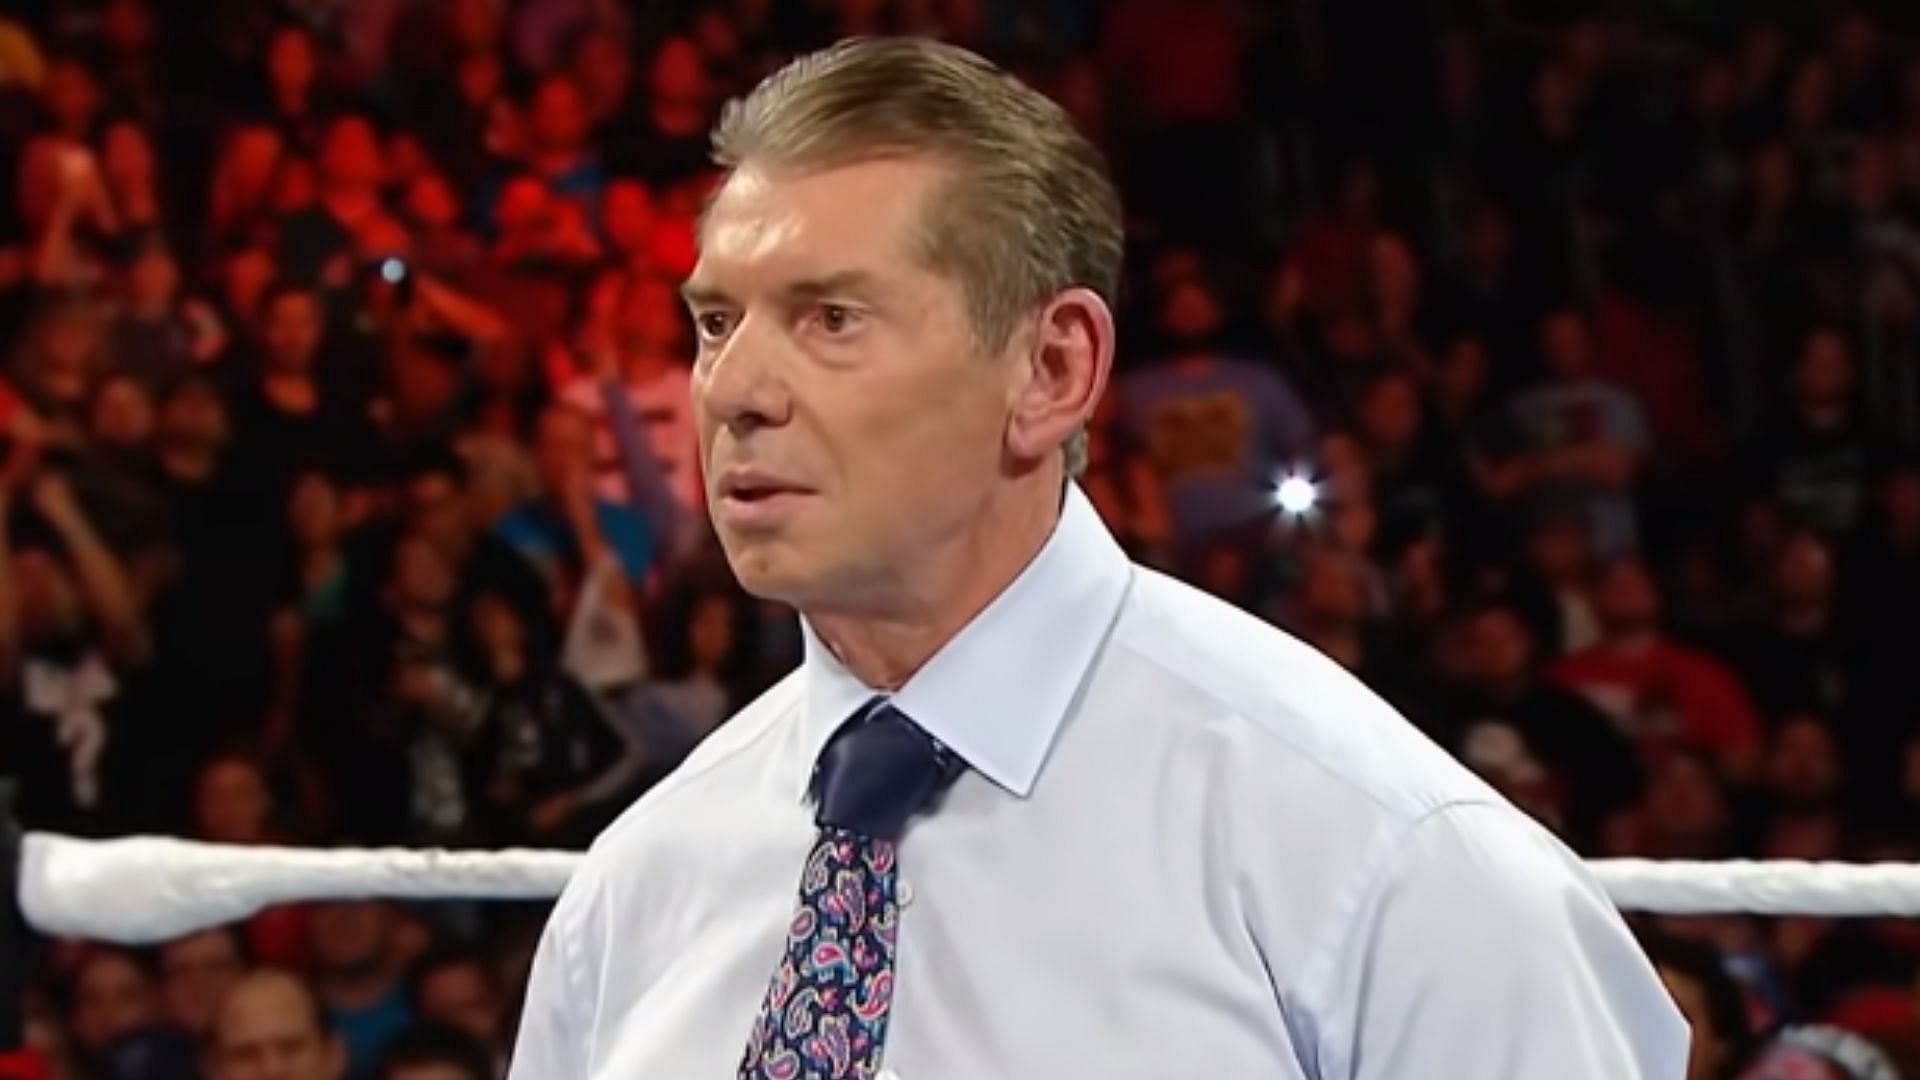 Former WWE Chairman Vince McMahon was not happy about this